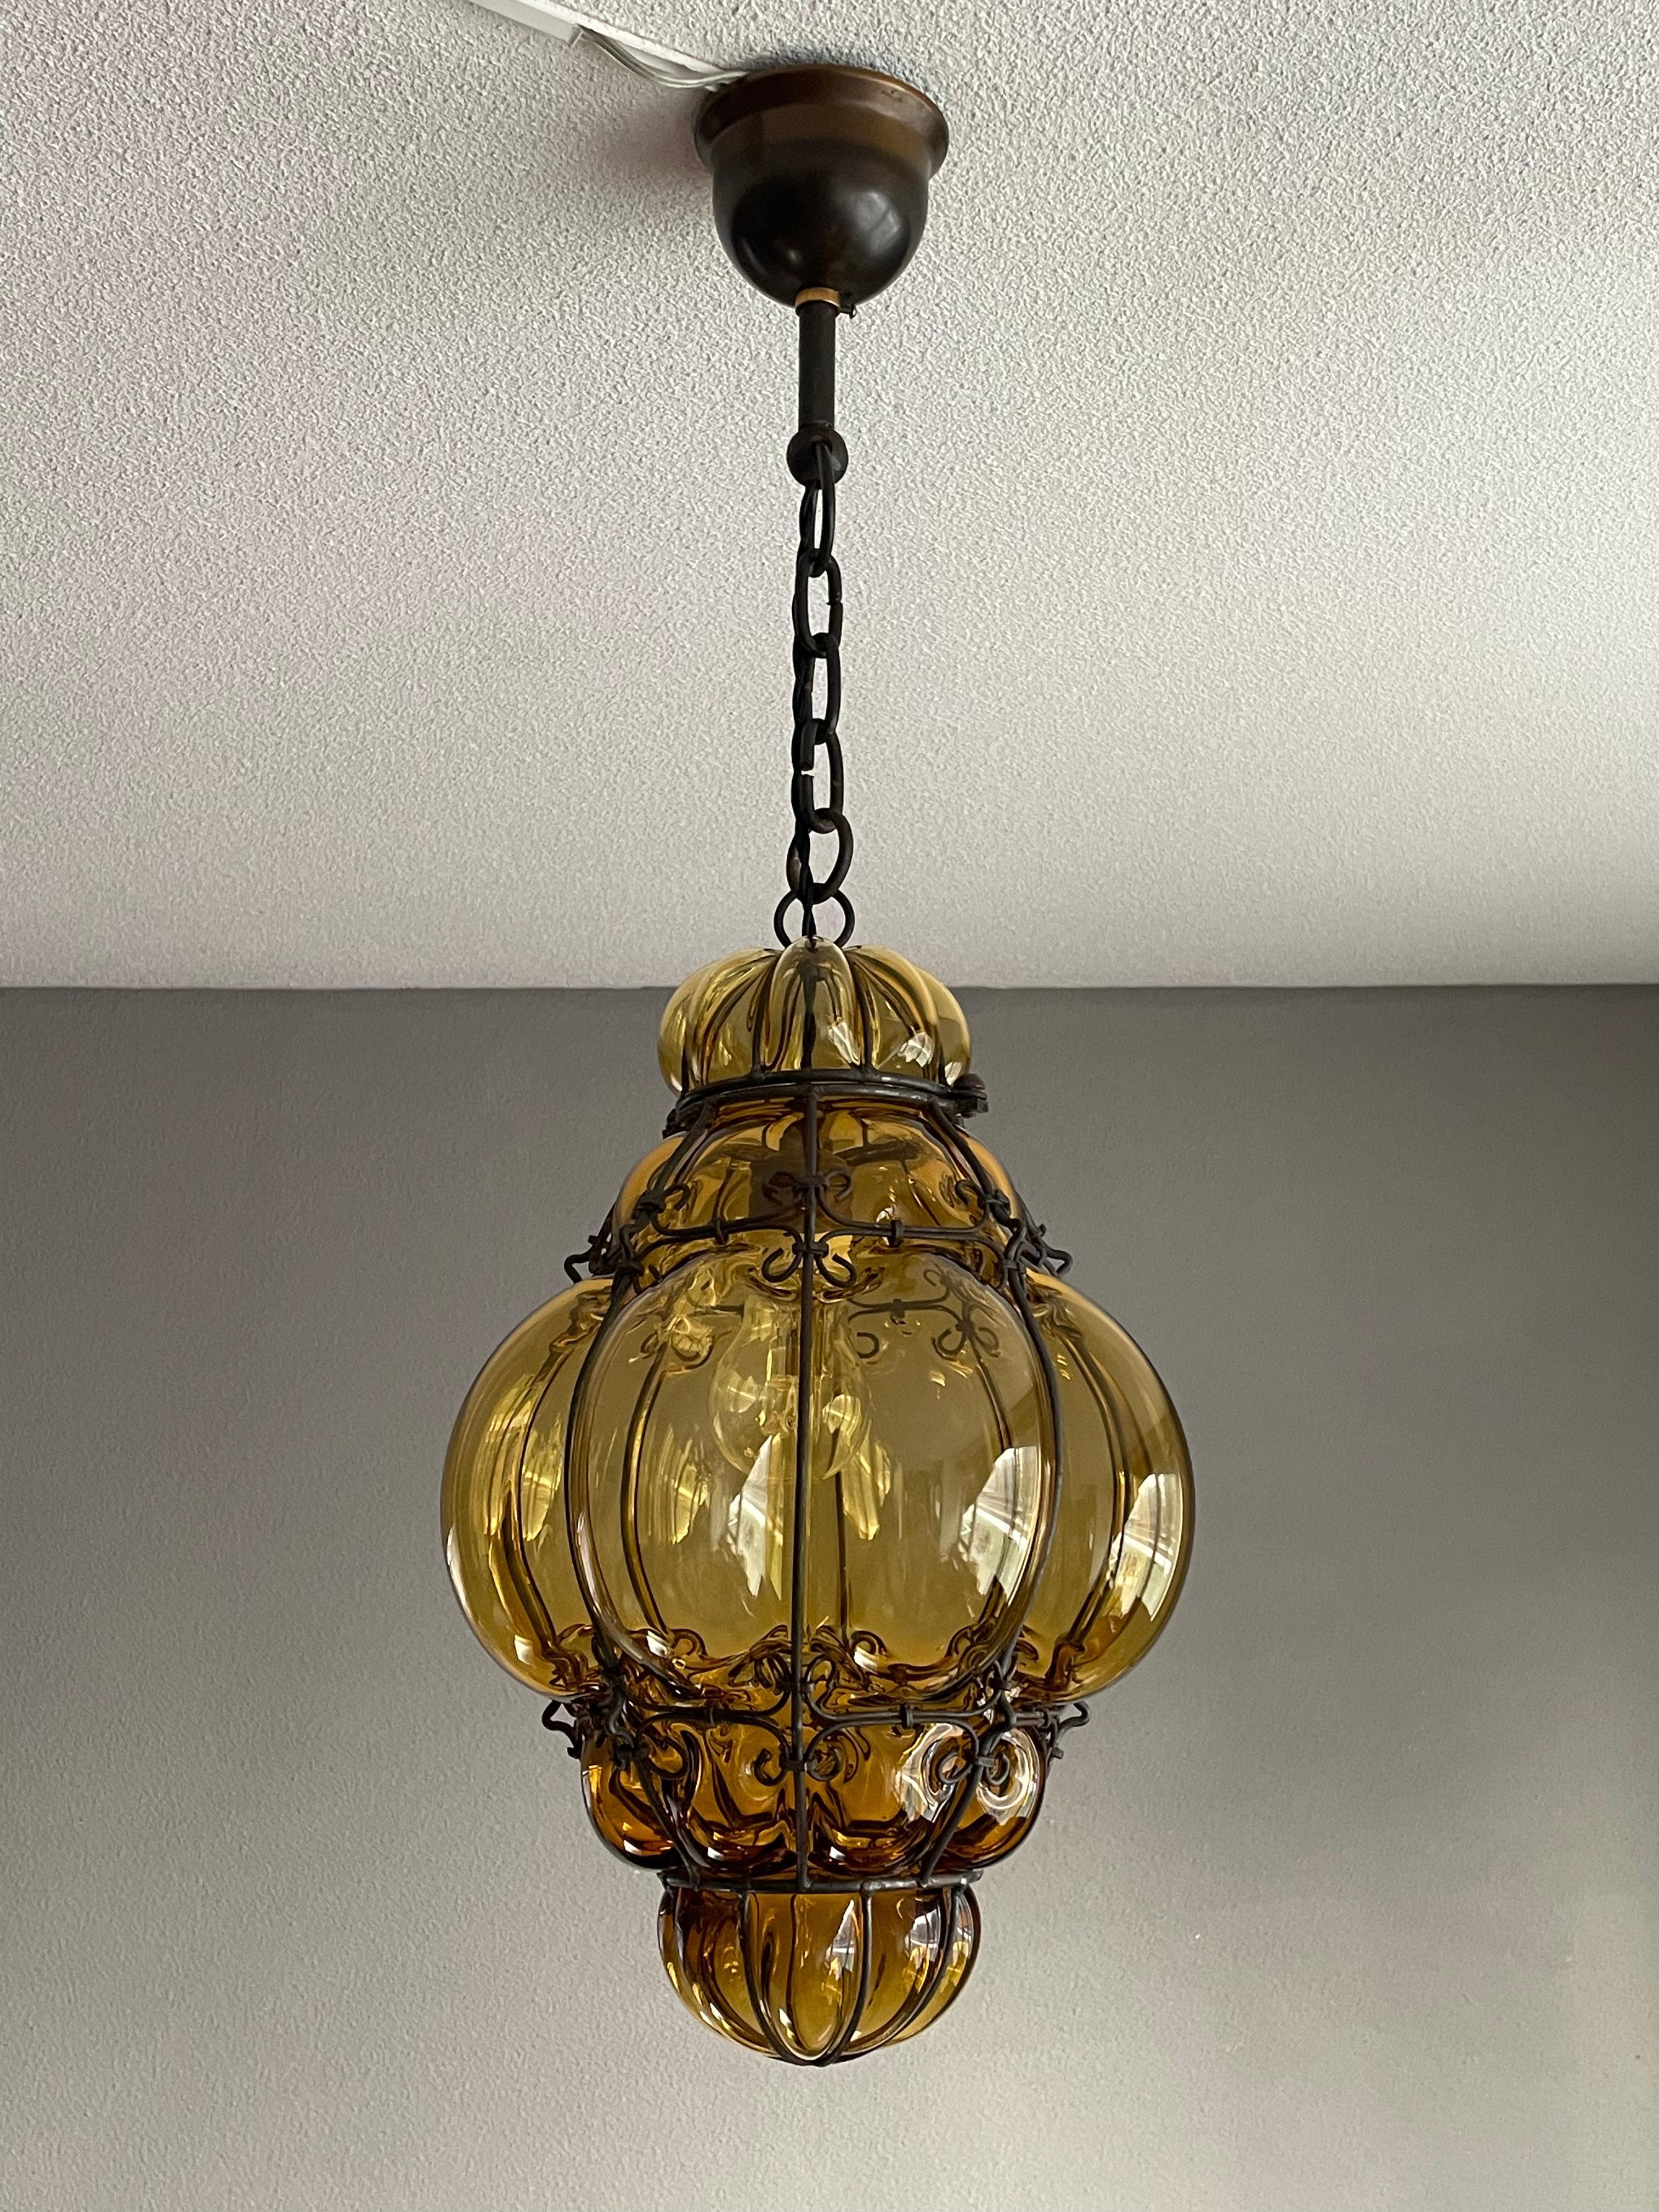 Antique Venetian Murano Pendant Light Mouthblown Glass into a Wrought Iron Frame In Good Condition For Sale In Lisse, NL